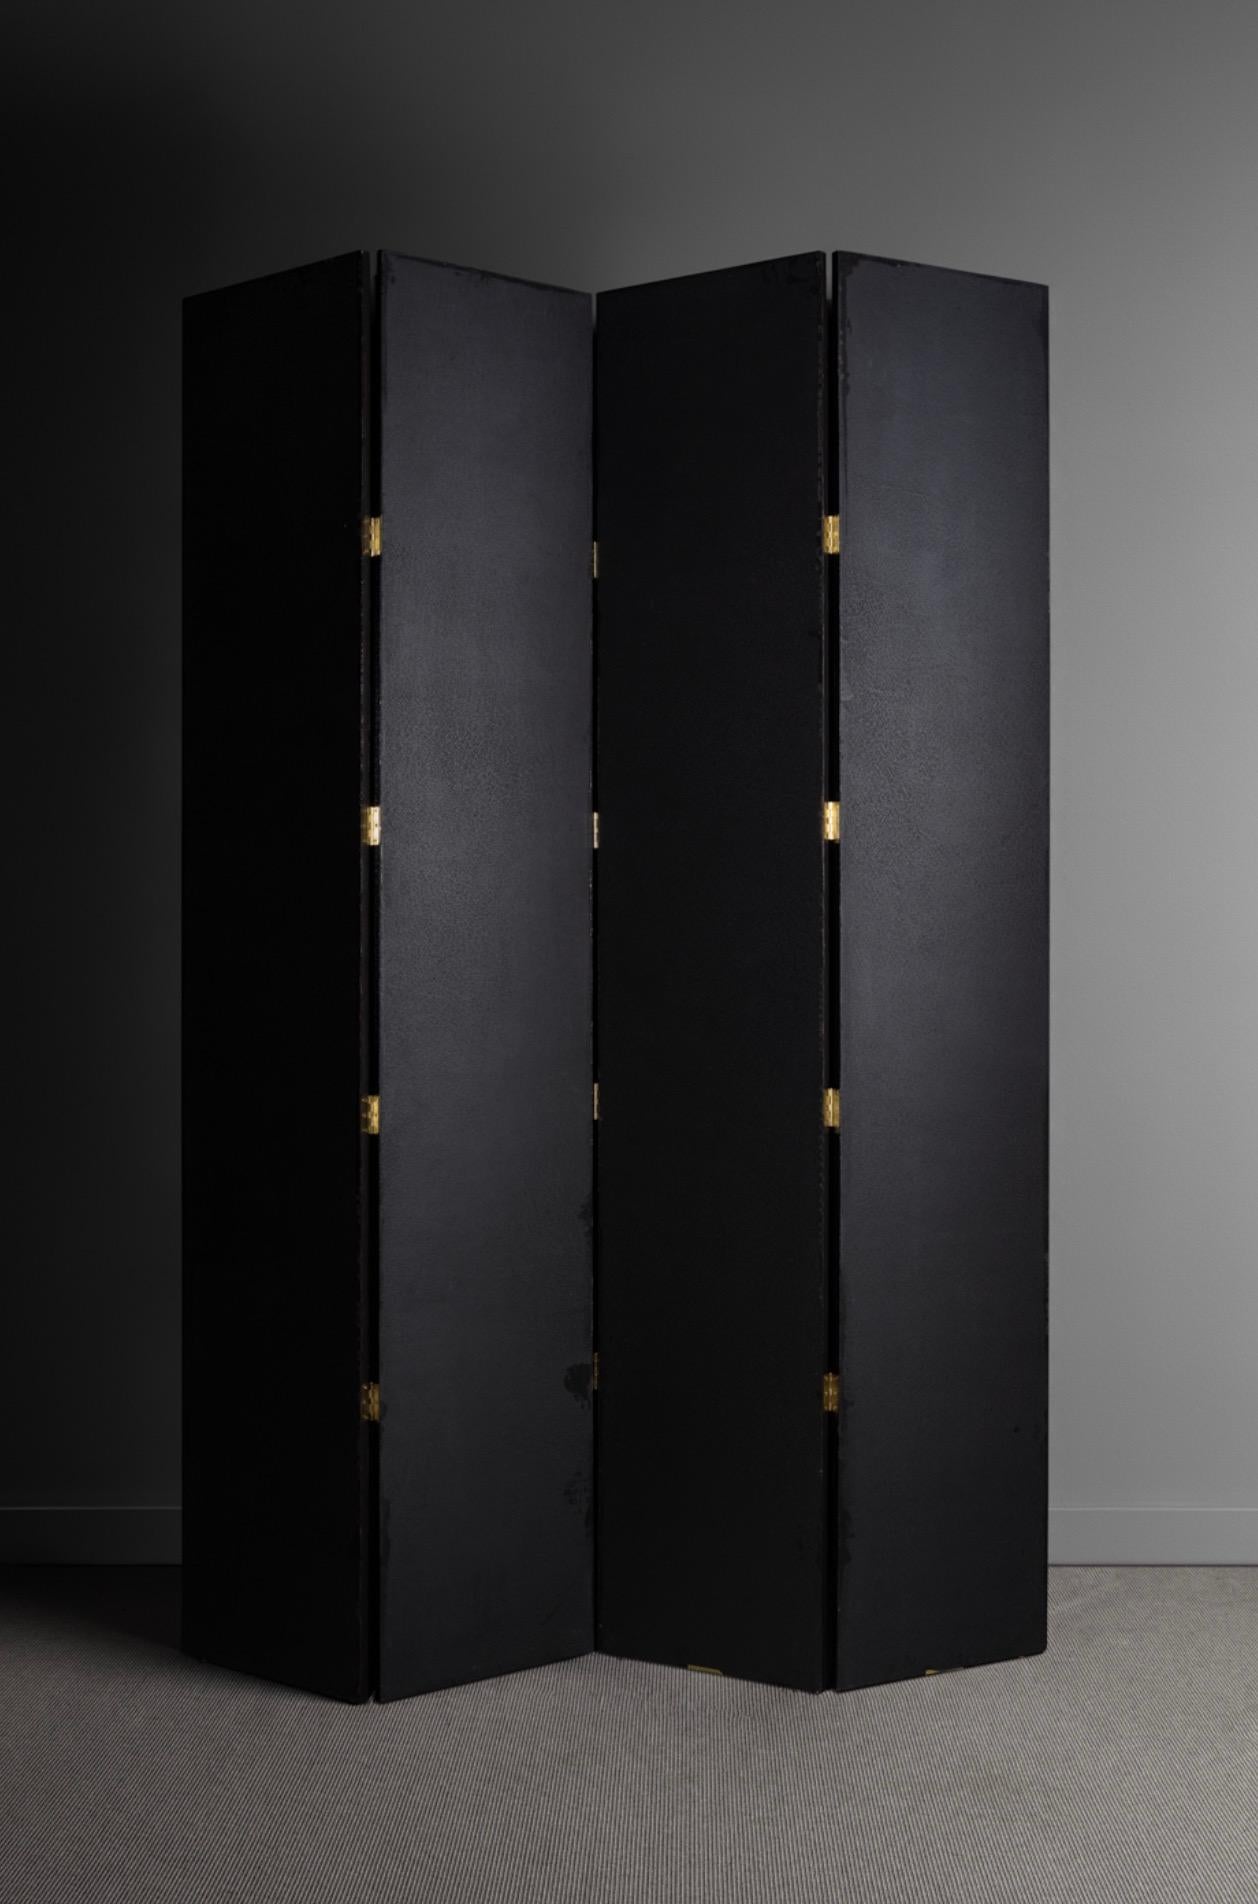 Yolande Milan Batteau (b. 1970)
USA, 2022
Tall four panel screen made of wood, marble dust plaster, abalone, micaceous plaster, handmade glazes and lacquer.